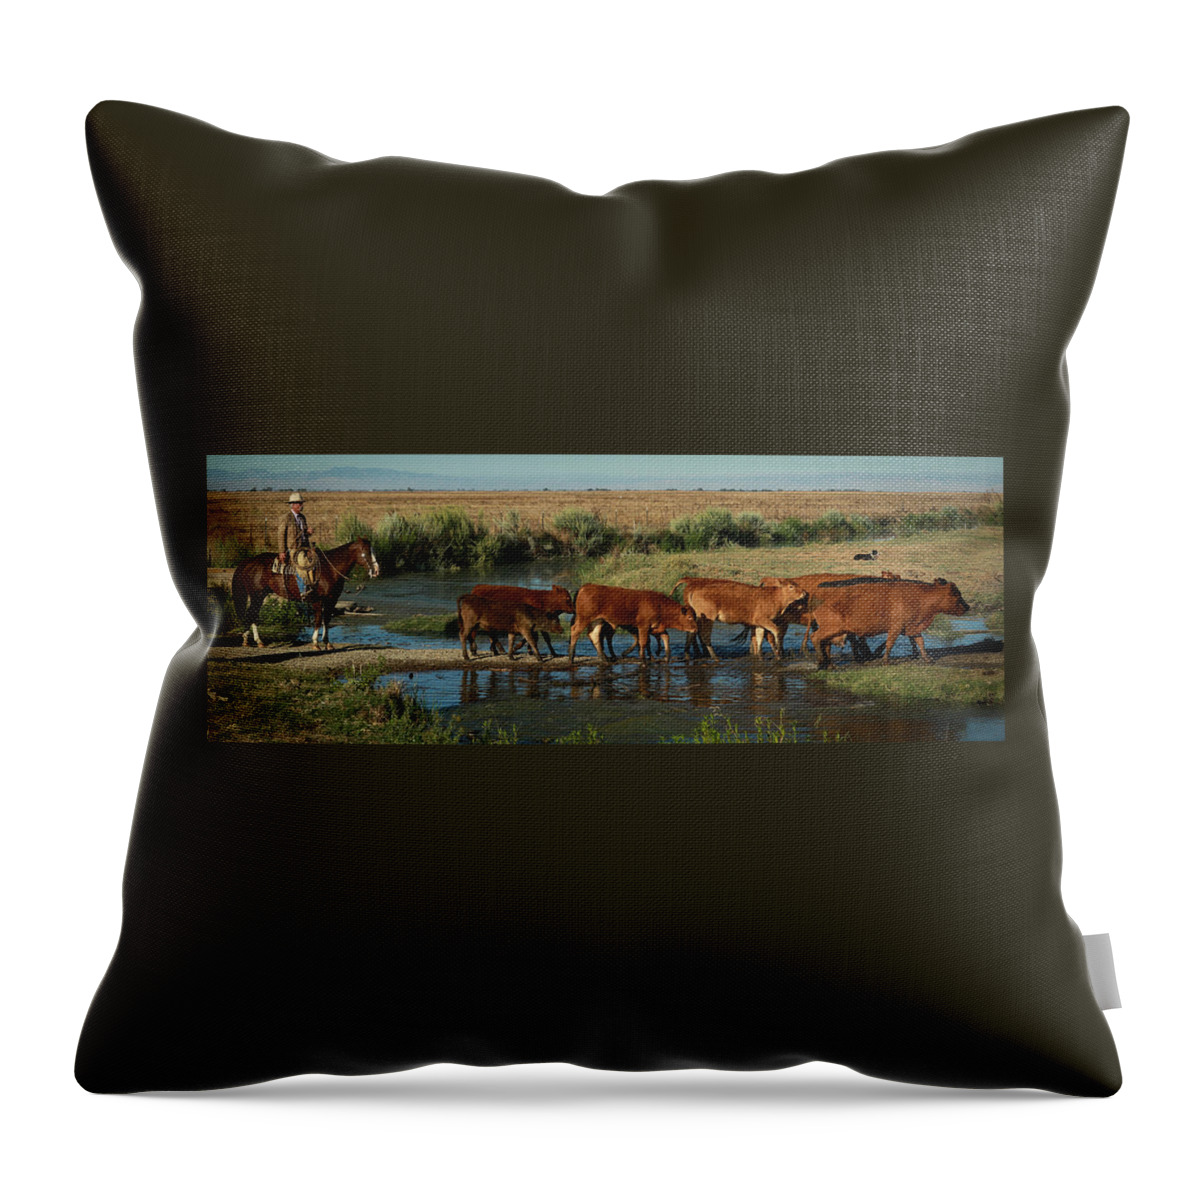 Cattle Throw Pillow featuring the photograph Red Cattle by Diane Bohna